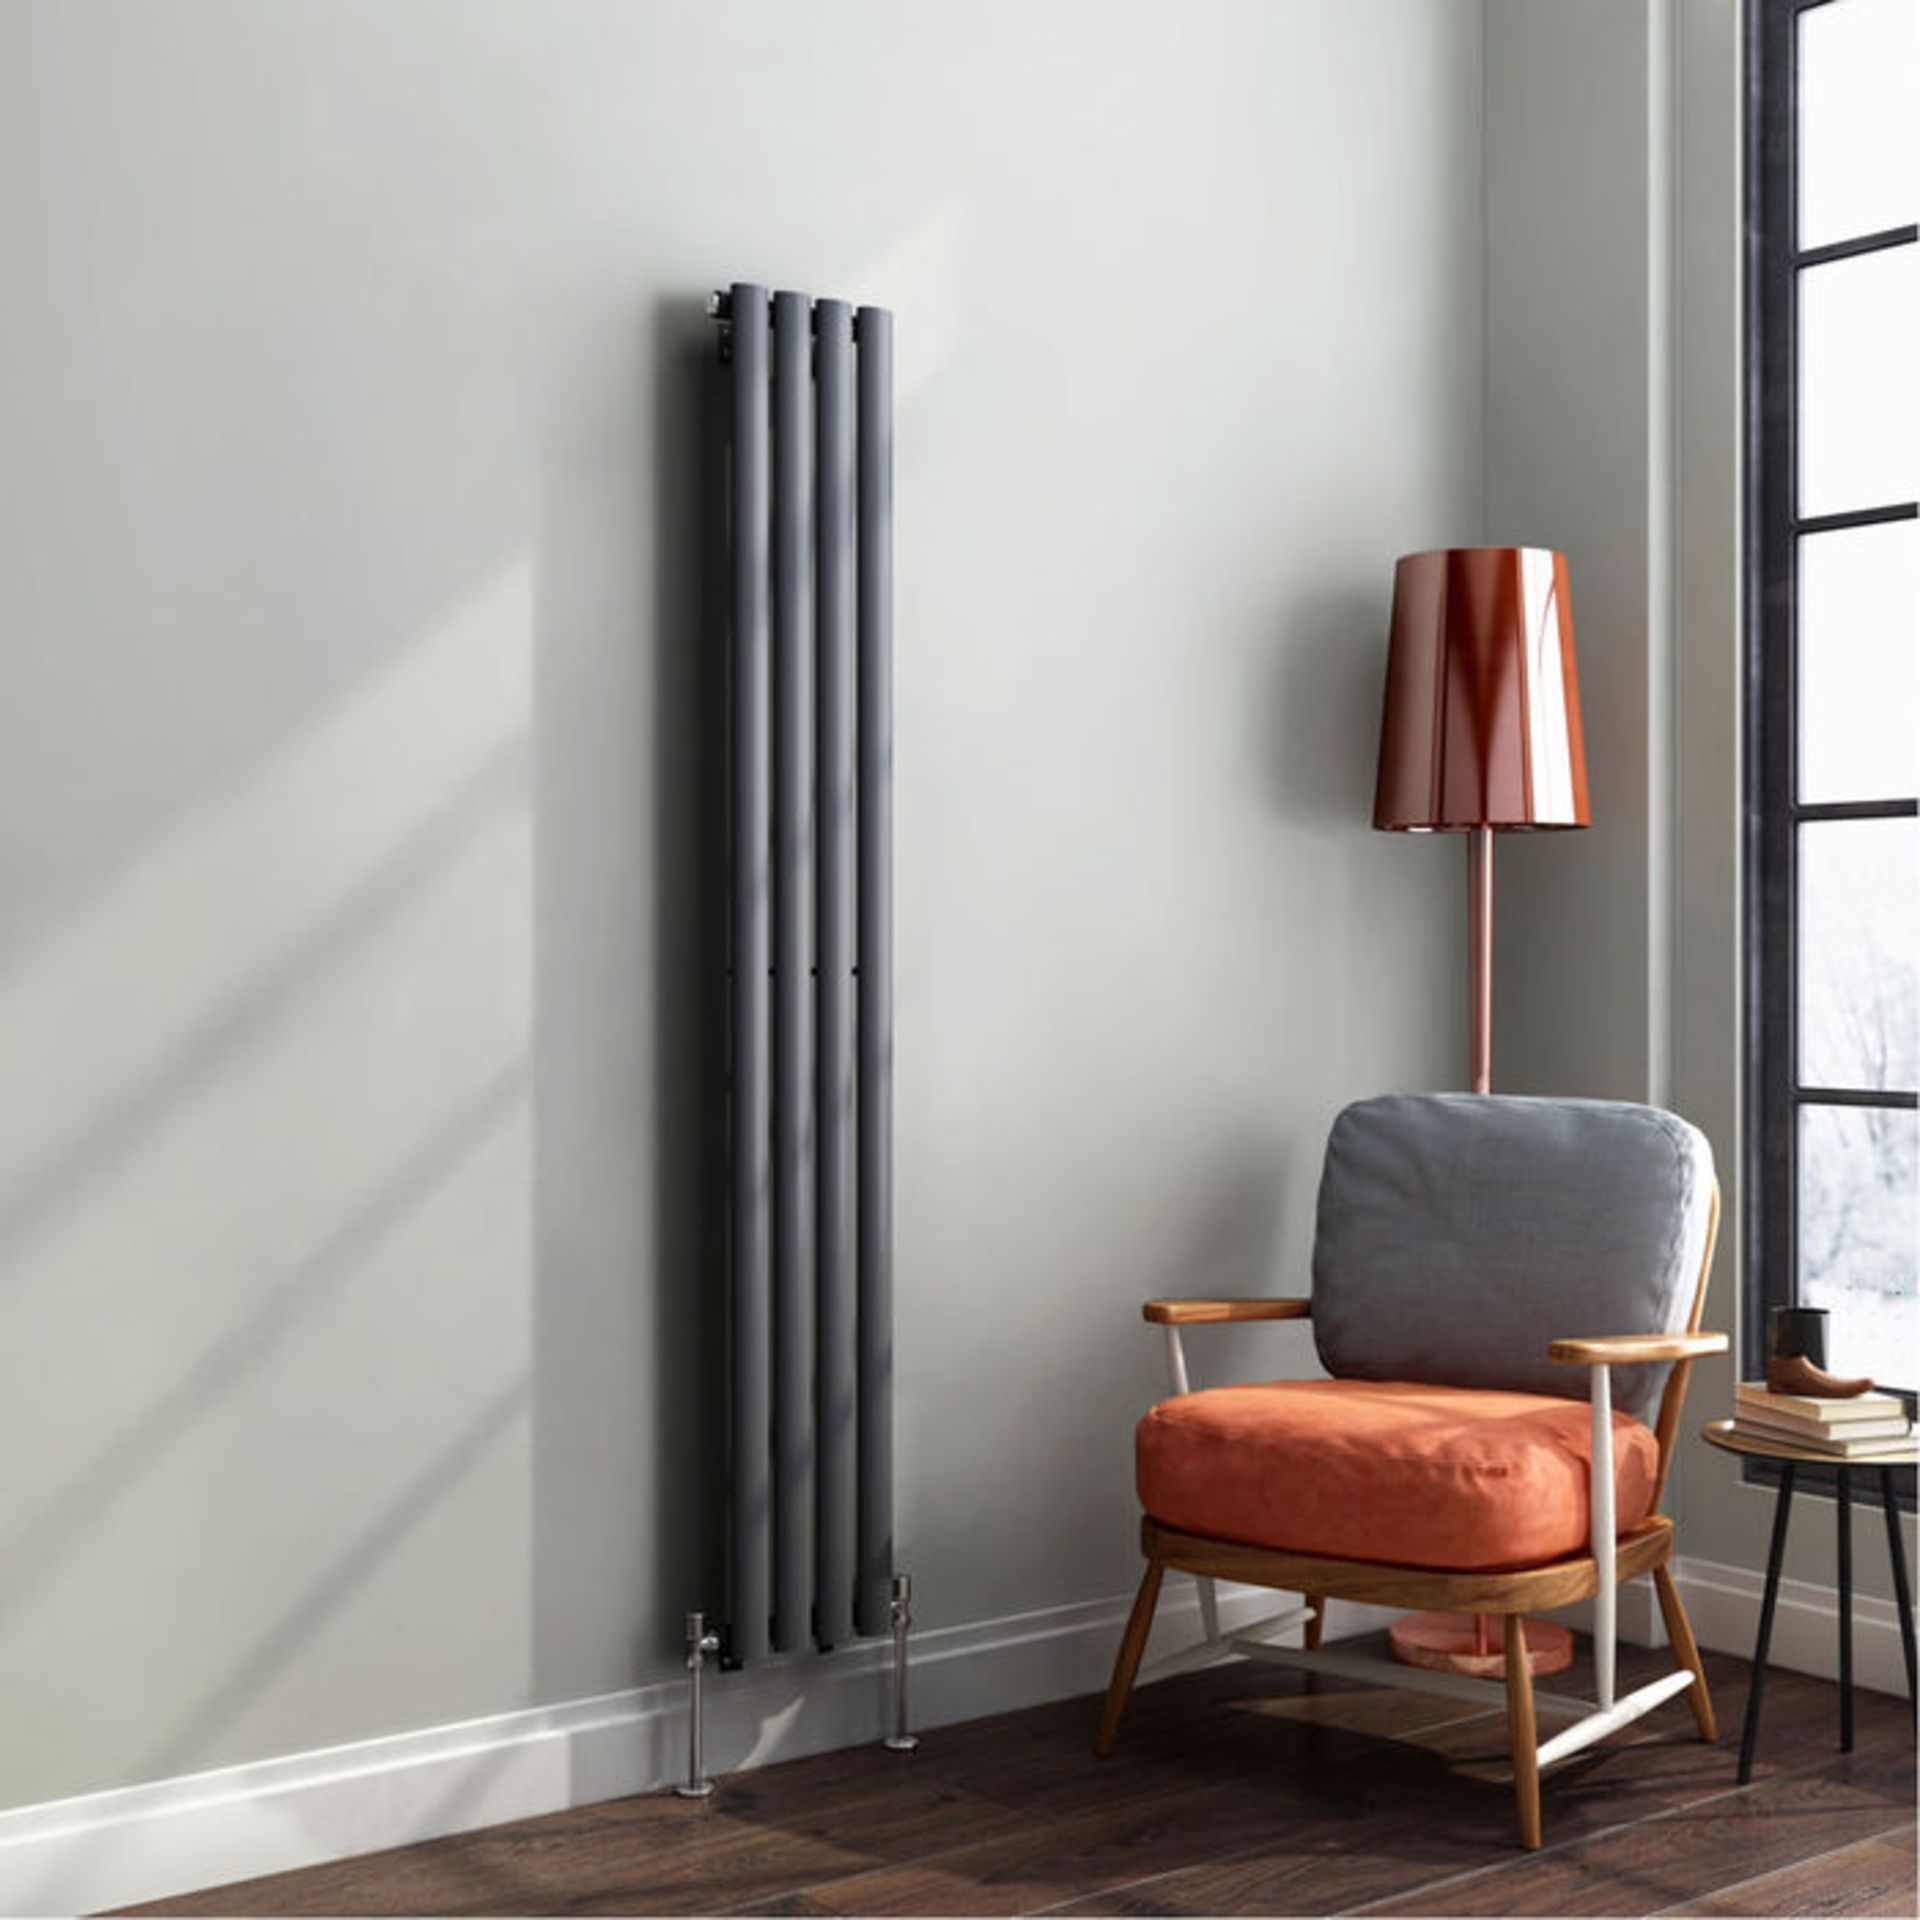 (AH201) 1600x240mm Anthracite Single Oval Tube Vertical Radiator. Made from low carbon steel with a - Image 2 of 2